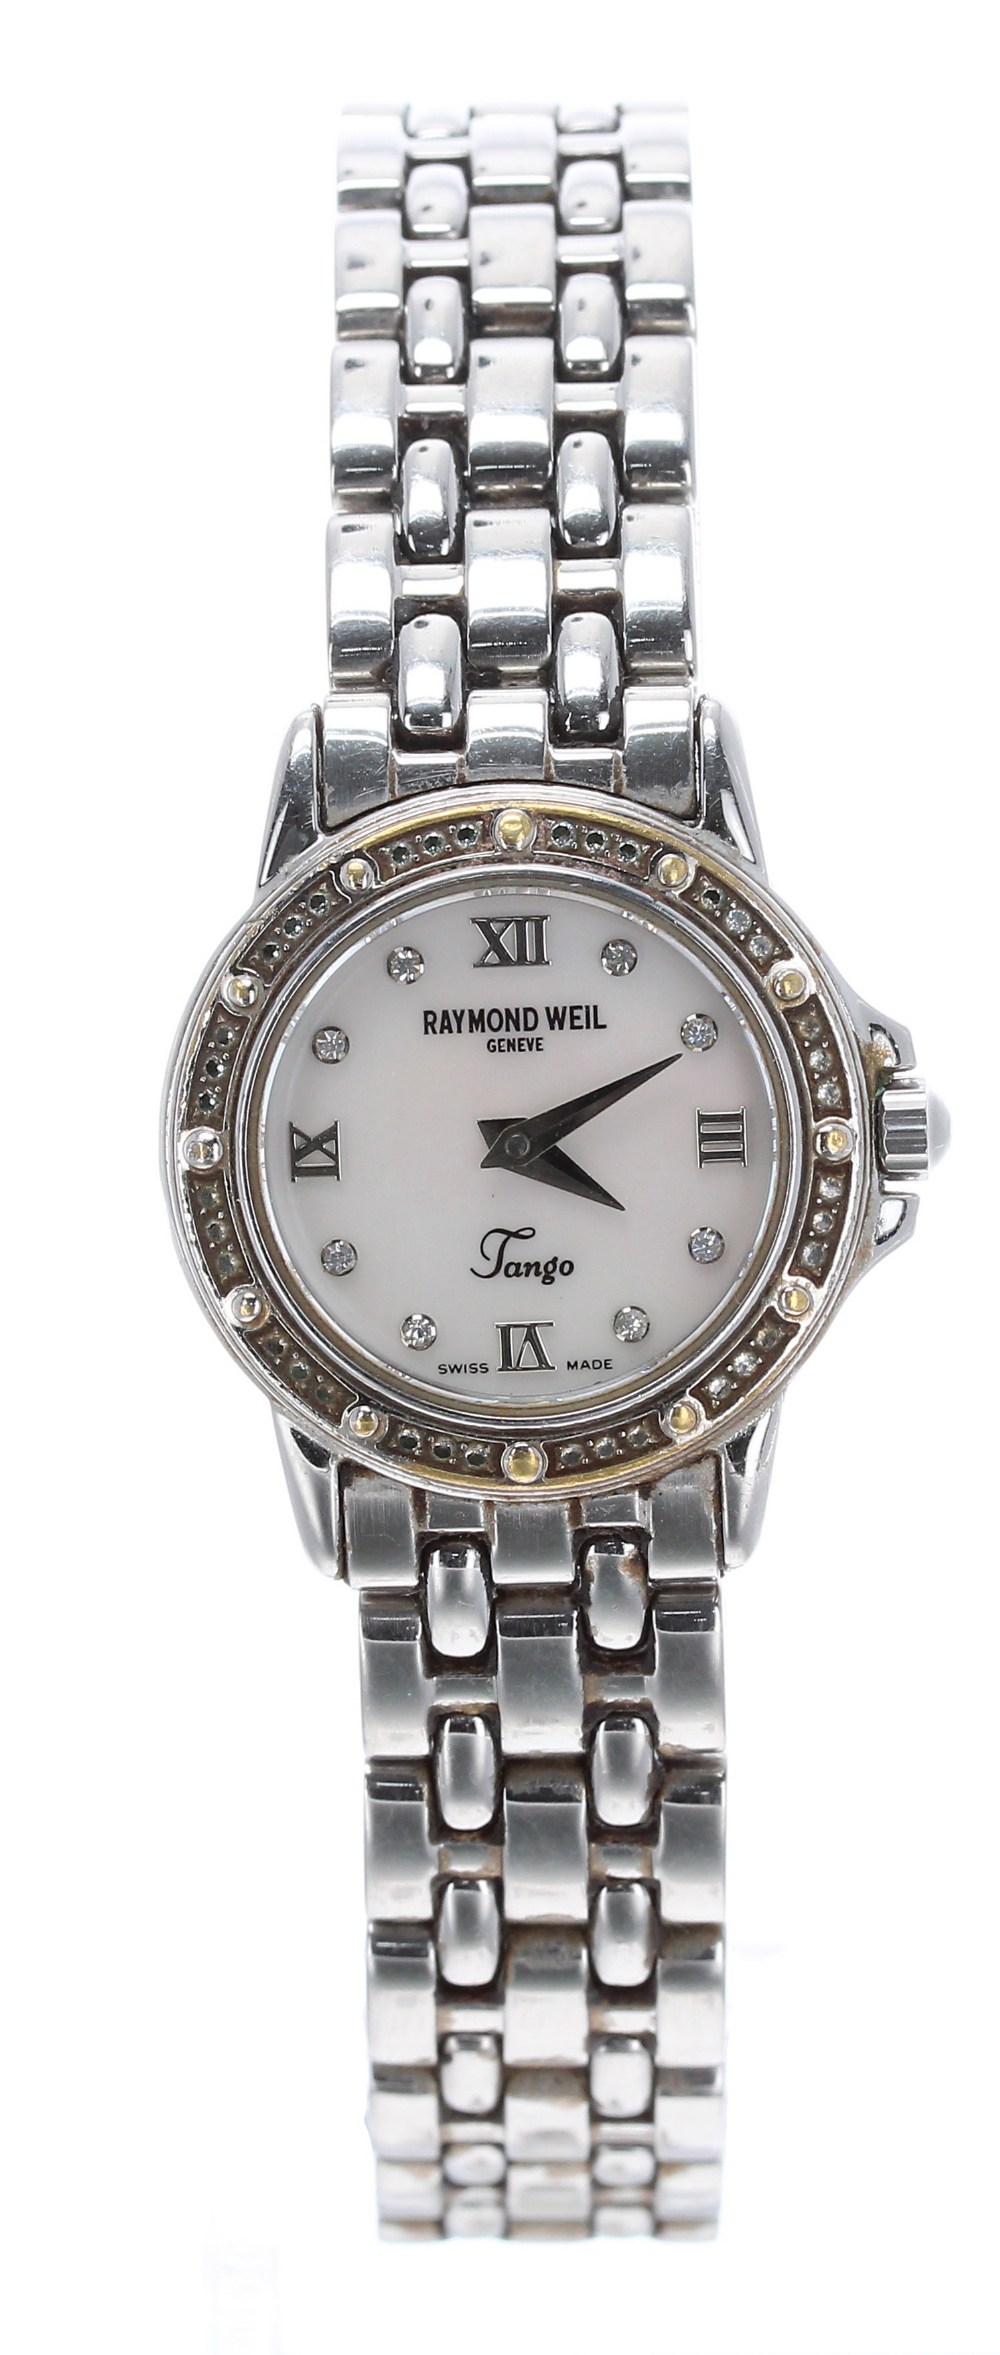 Raymond Weil Geneve Tango bicolour lady's bracelet watch, ref. 5860, circular mother of pearl dial